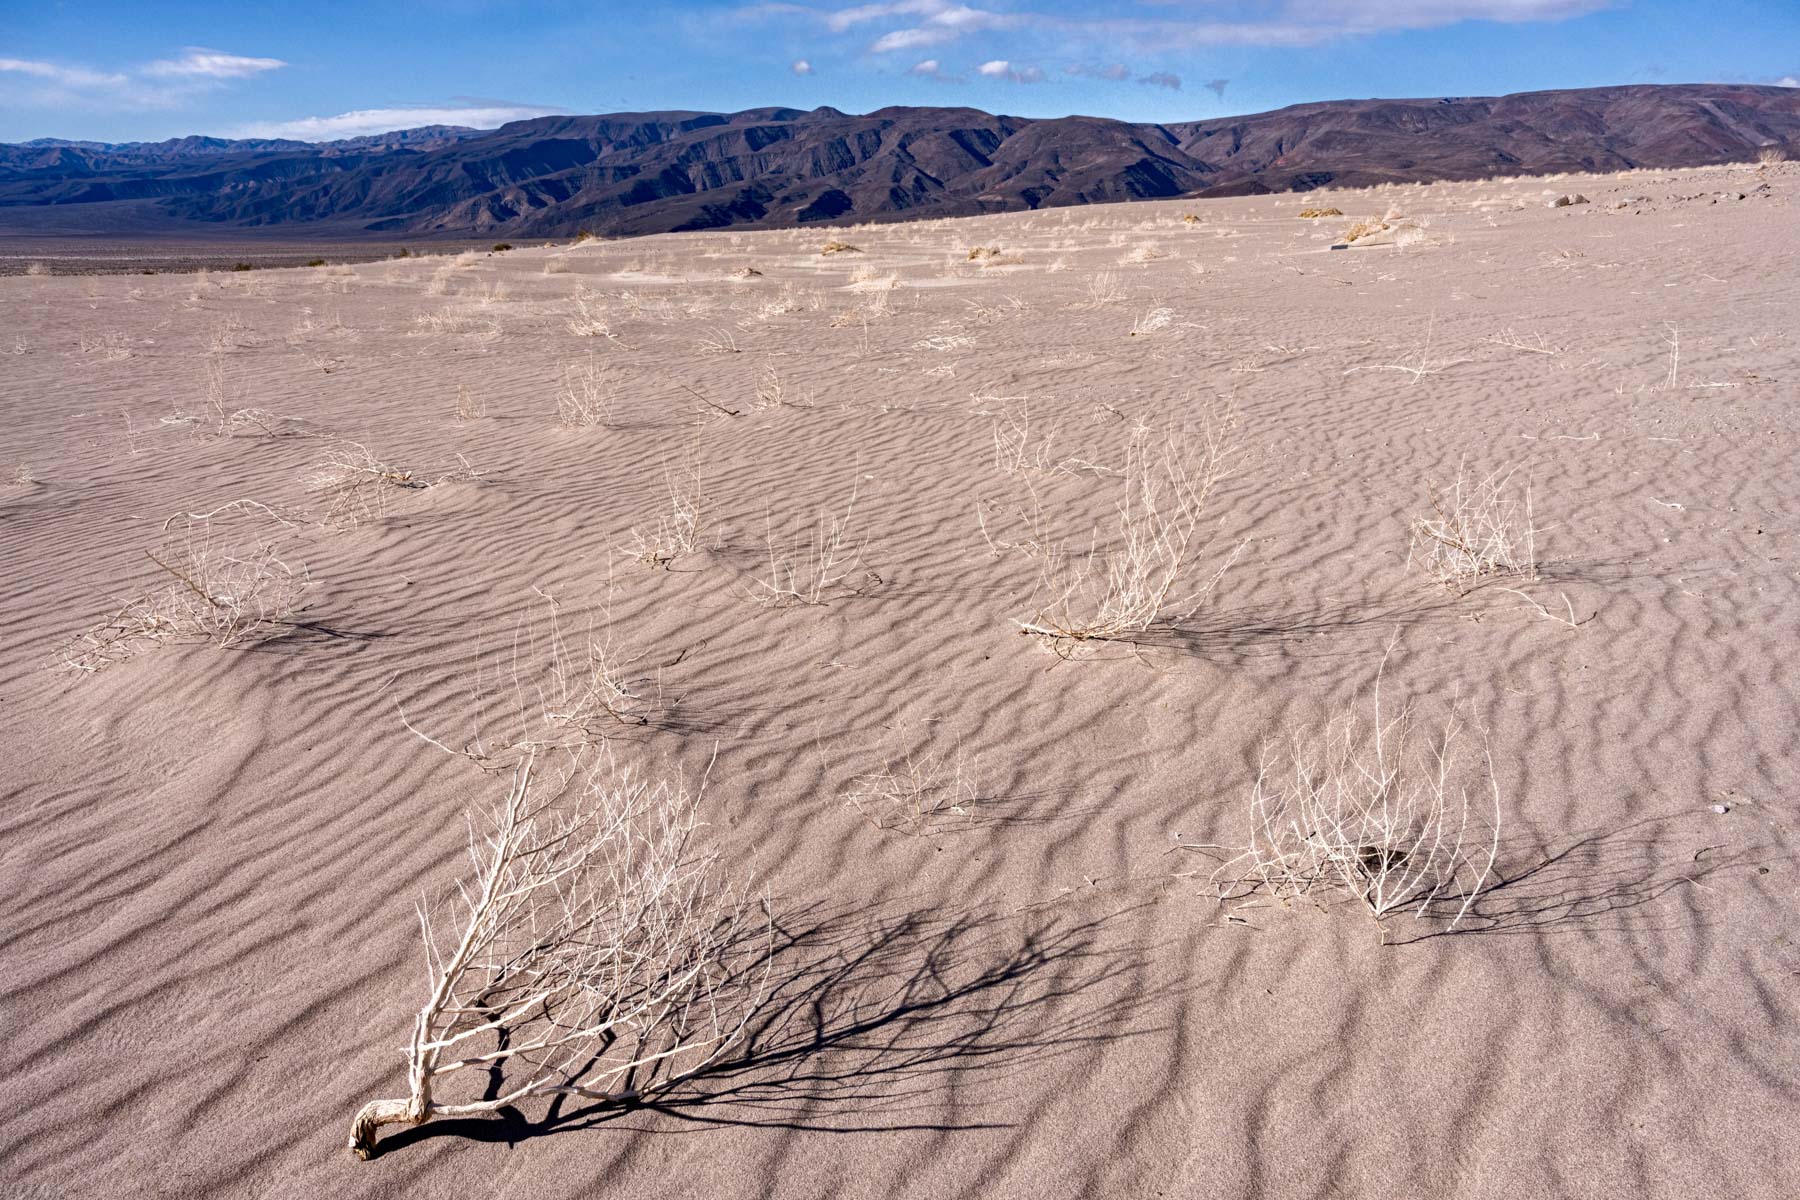 Tumbleweed on the Panamint Dunes in Death Valley National Park